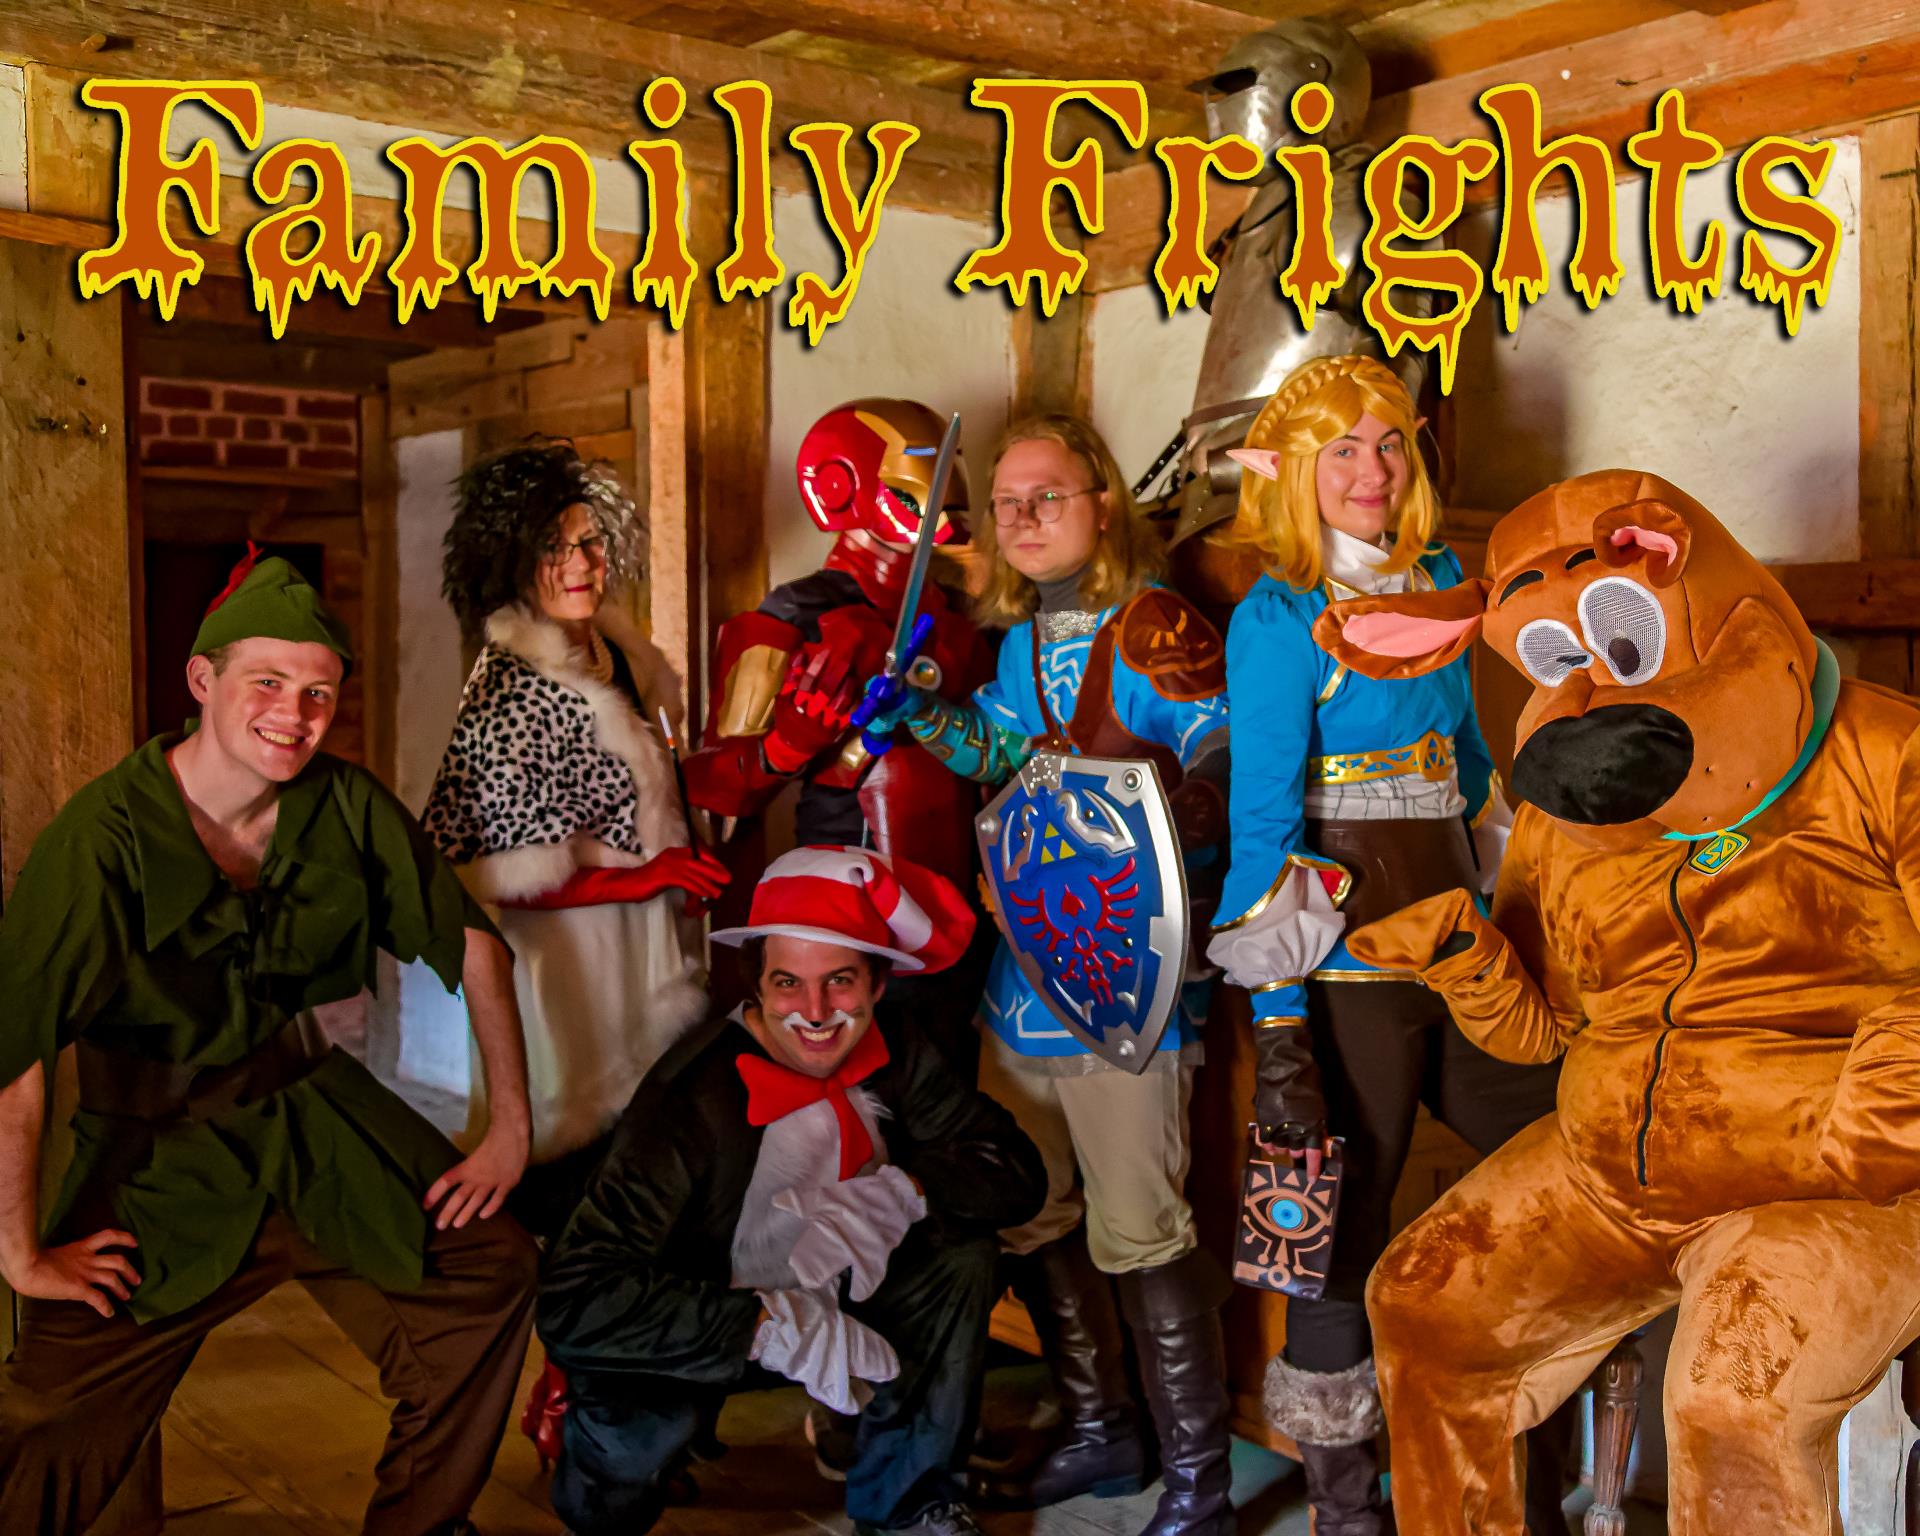 Costumed characters gathered in a James Fort building for Family Frights